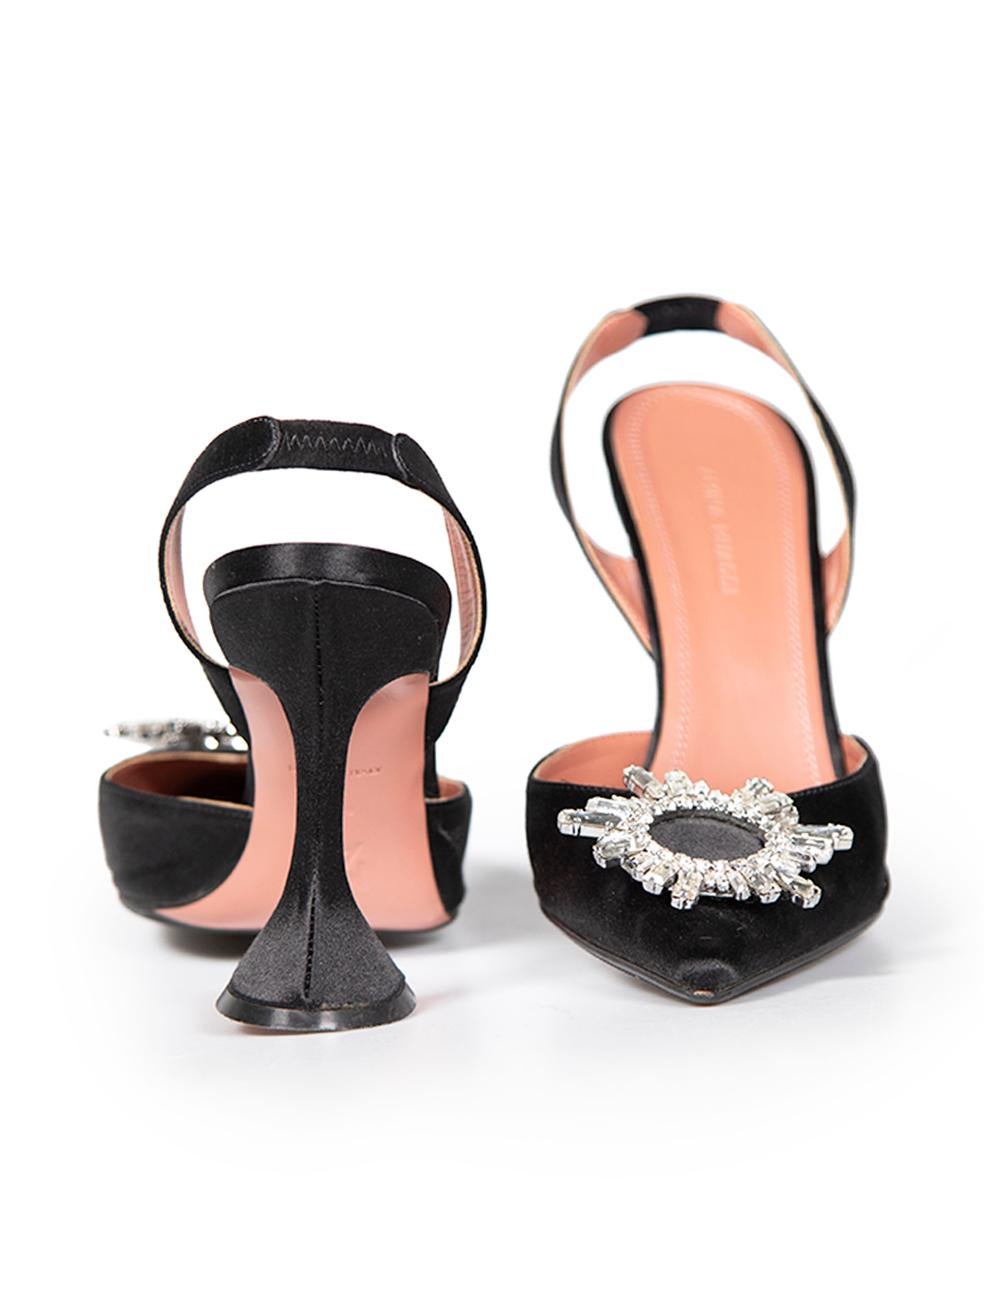 Amina Muaddi Black Satin Begum Buckle Heels Size IT 39.5 In Good Condition For Sale In London, GB